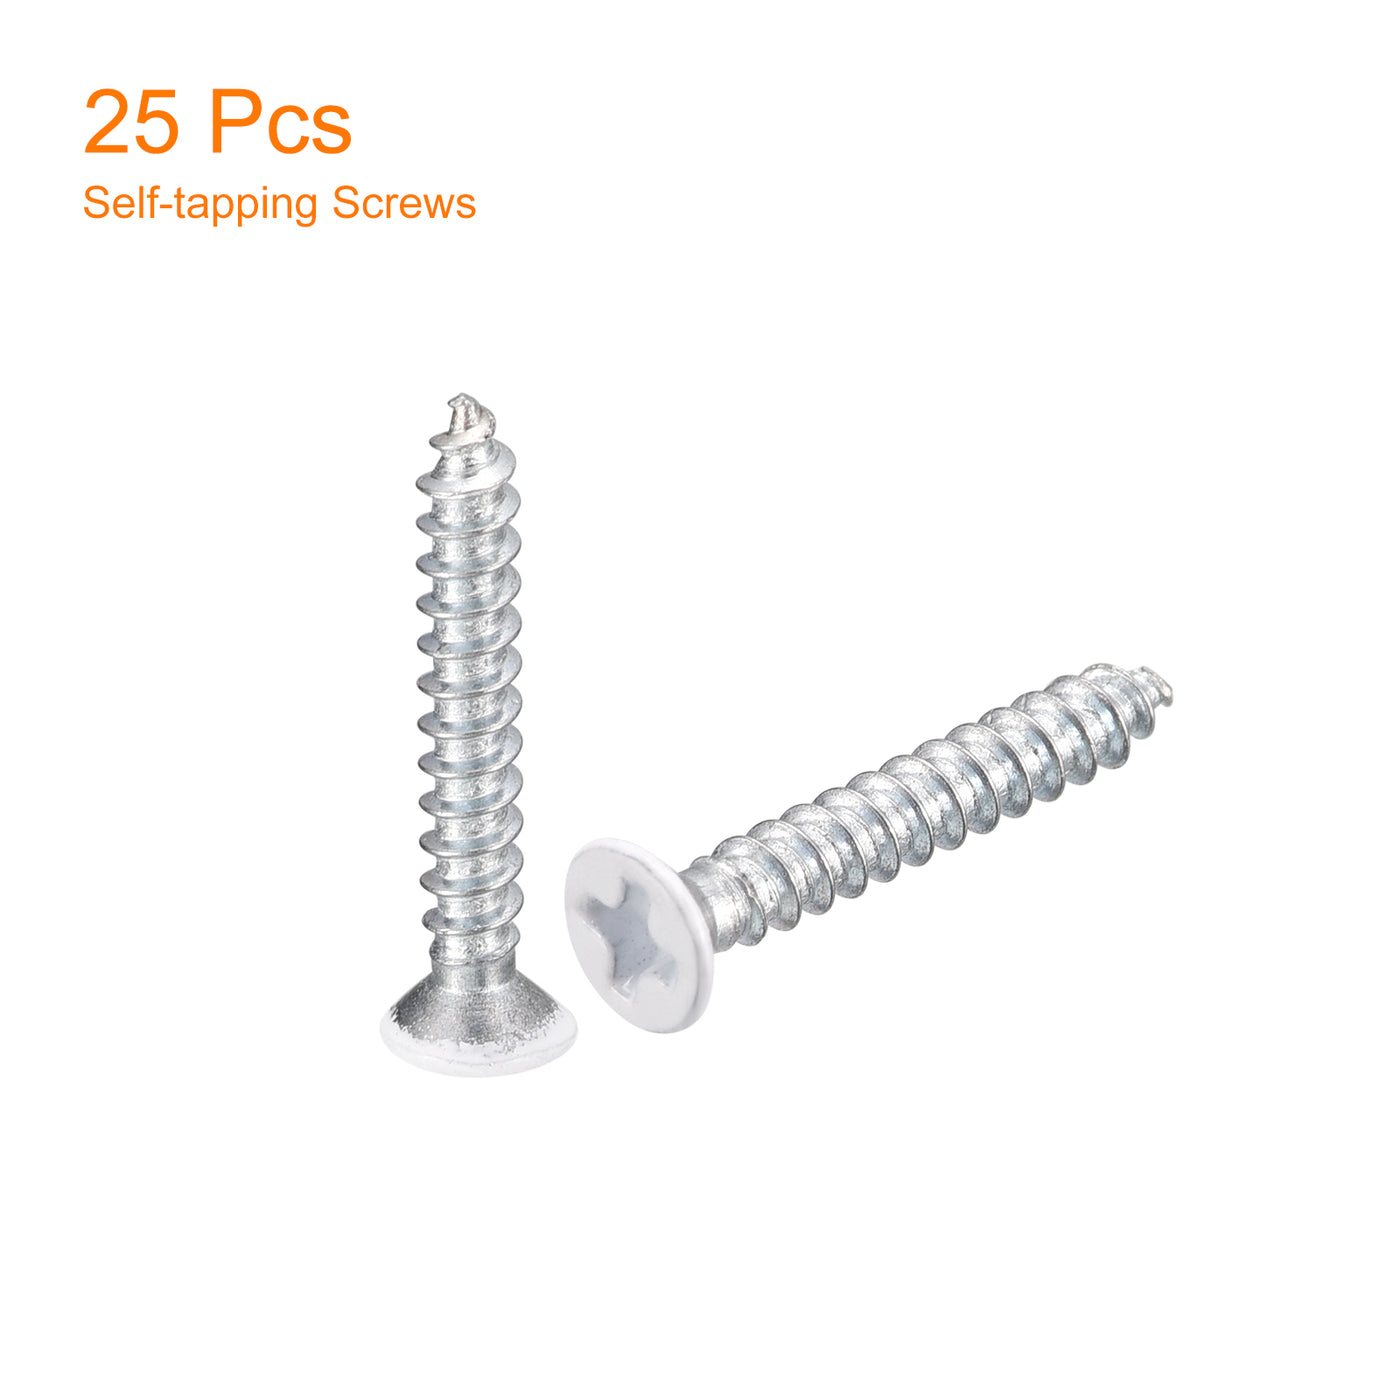 uxcell Uxcell ST3x20mm White Self Tapping Screws, 25pcs Flat Head Phillips Wood Screws